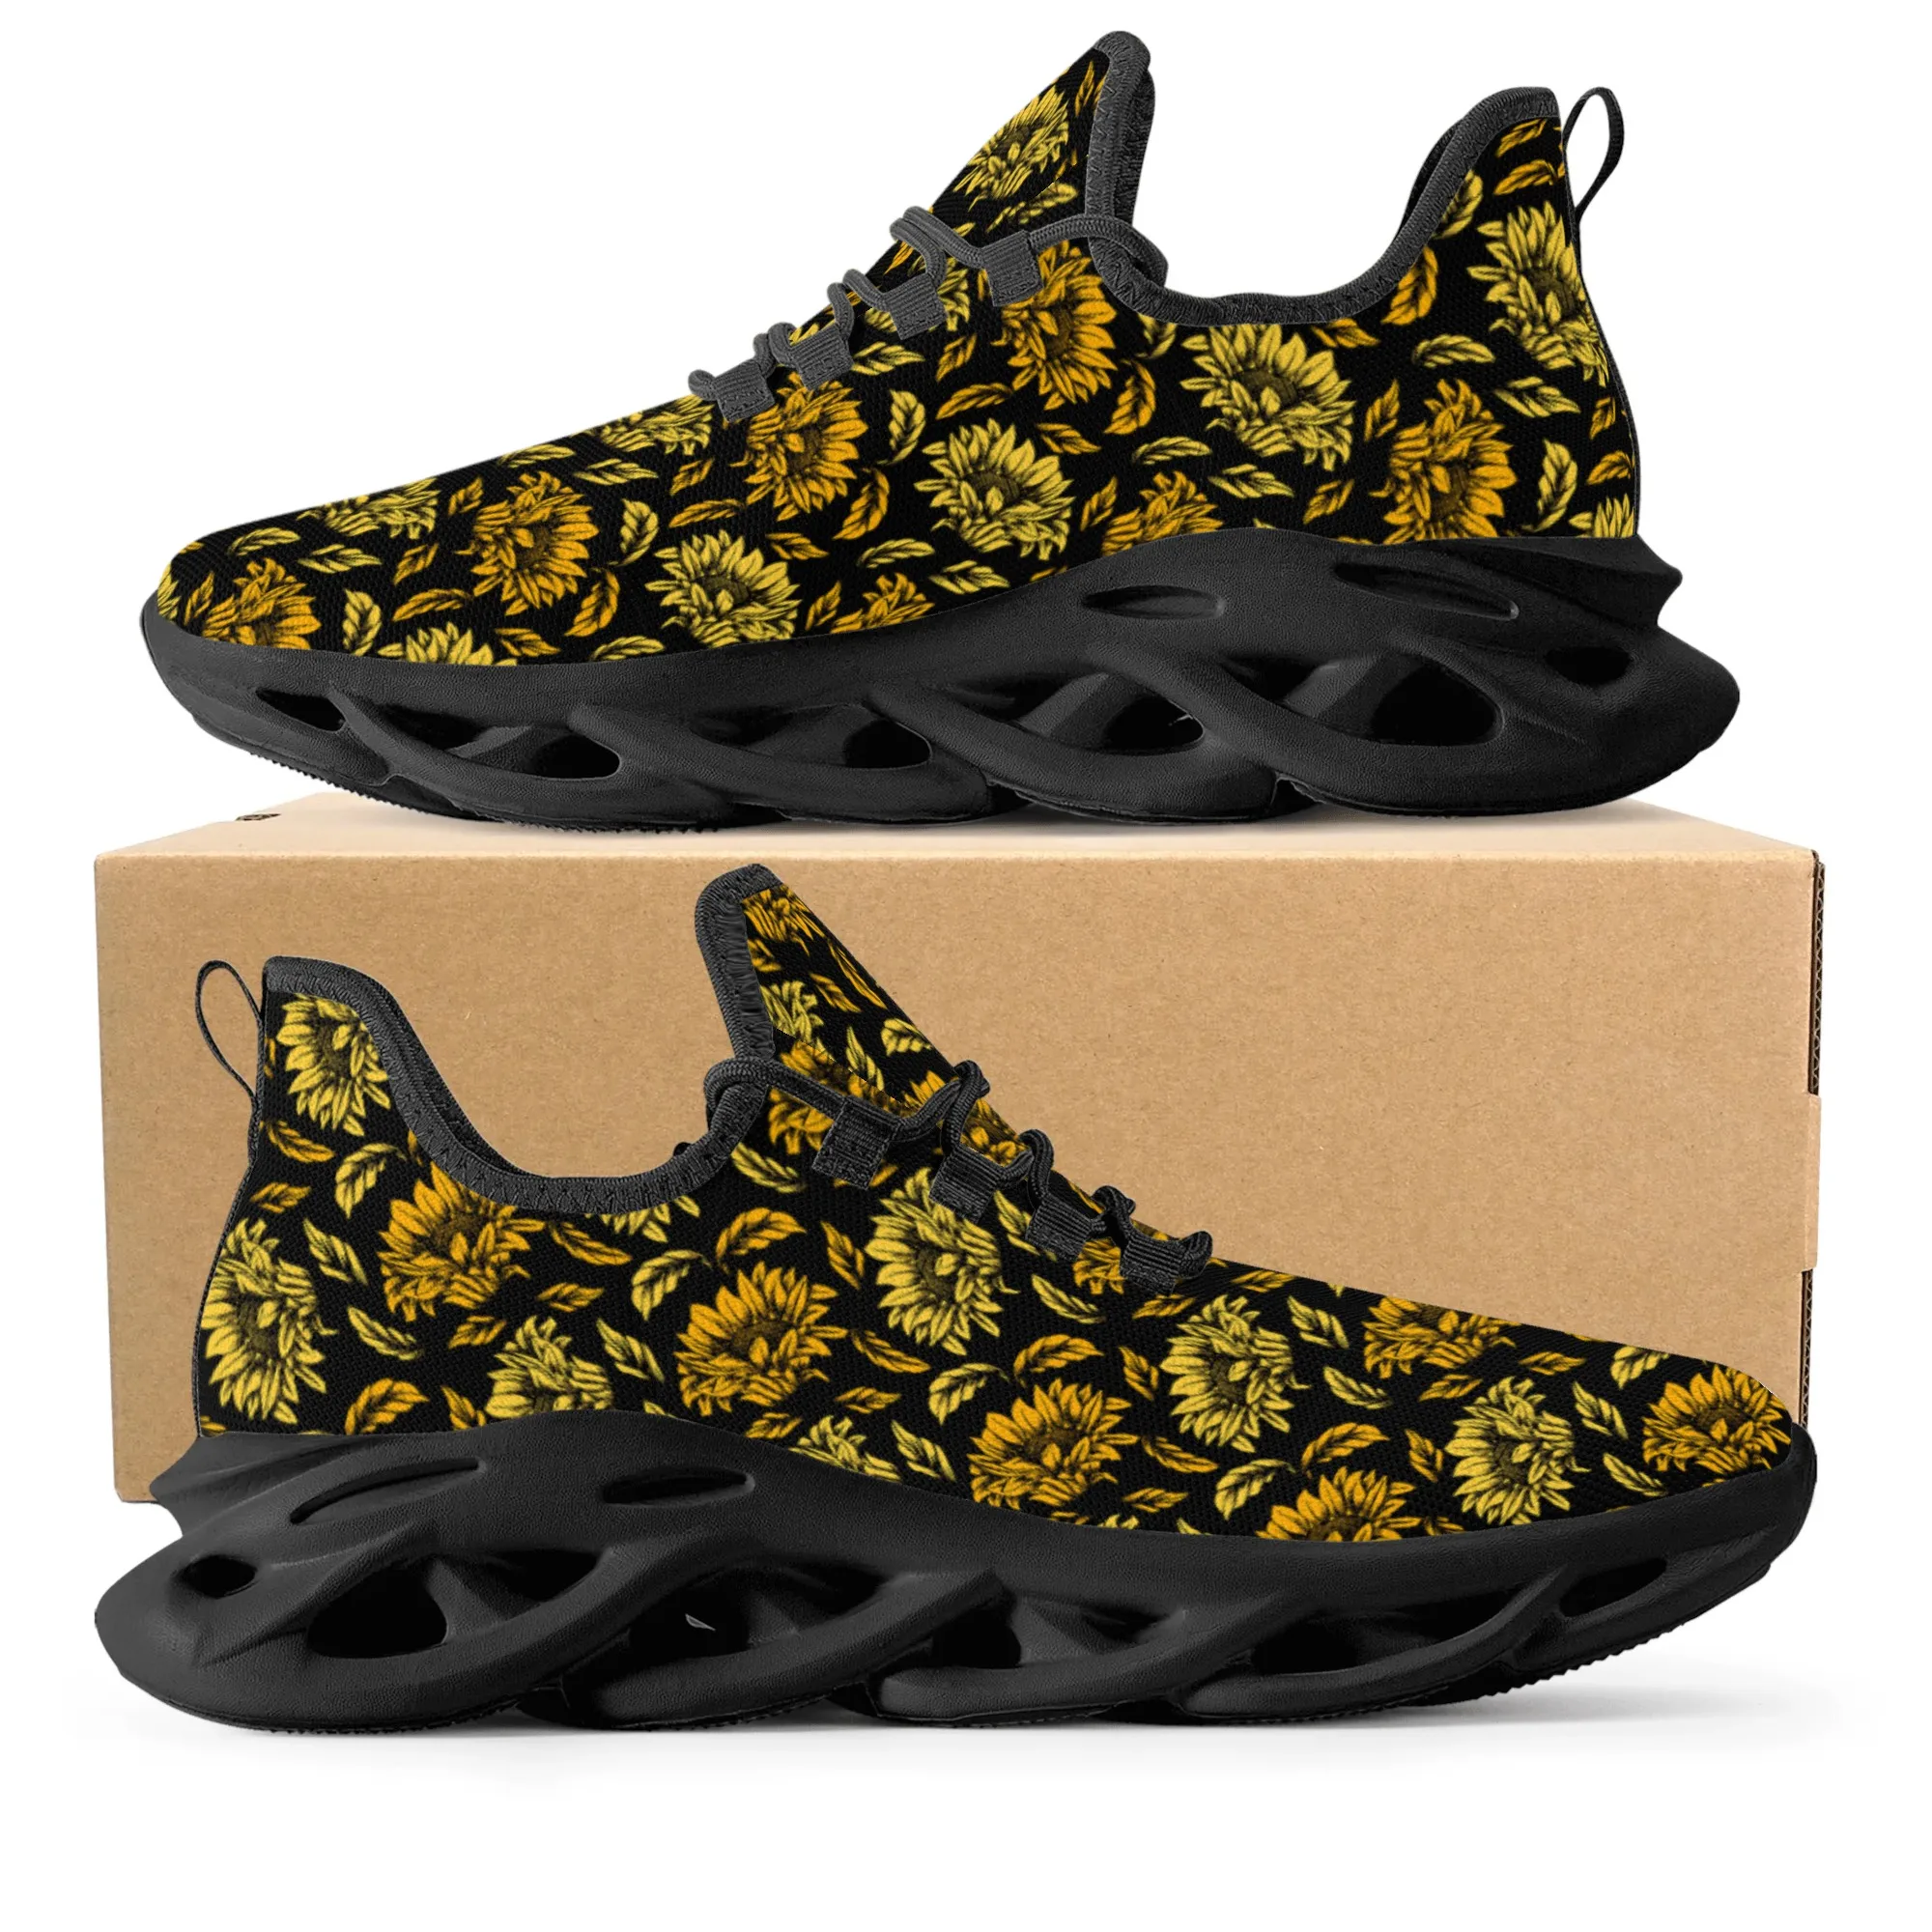 Sunflowers Print Design Fashion Funny Sneakers Men Women Teenager Breathable Mesh Casual Running Shoes Lace-Up Basketball Shoe 2021 men and women casual fashion sports shoes couple summer new woven breathable basketball running shock absorption sneakers